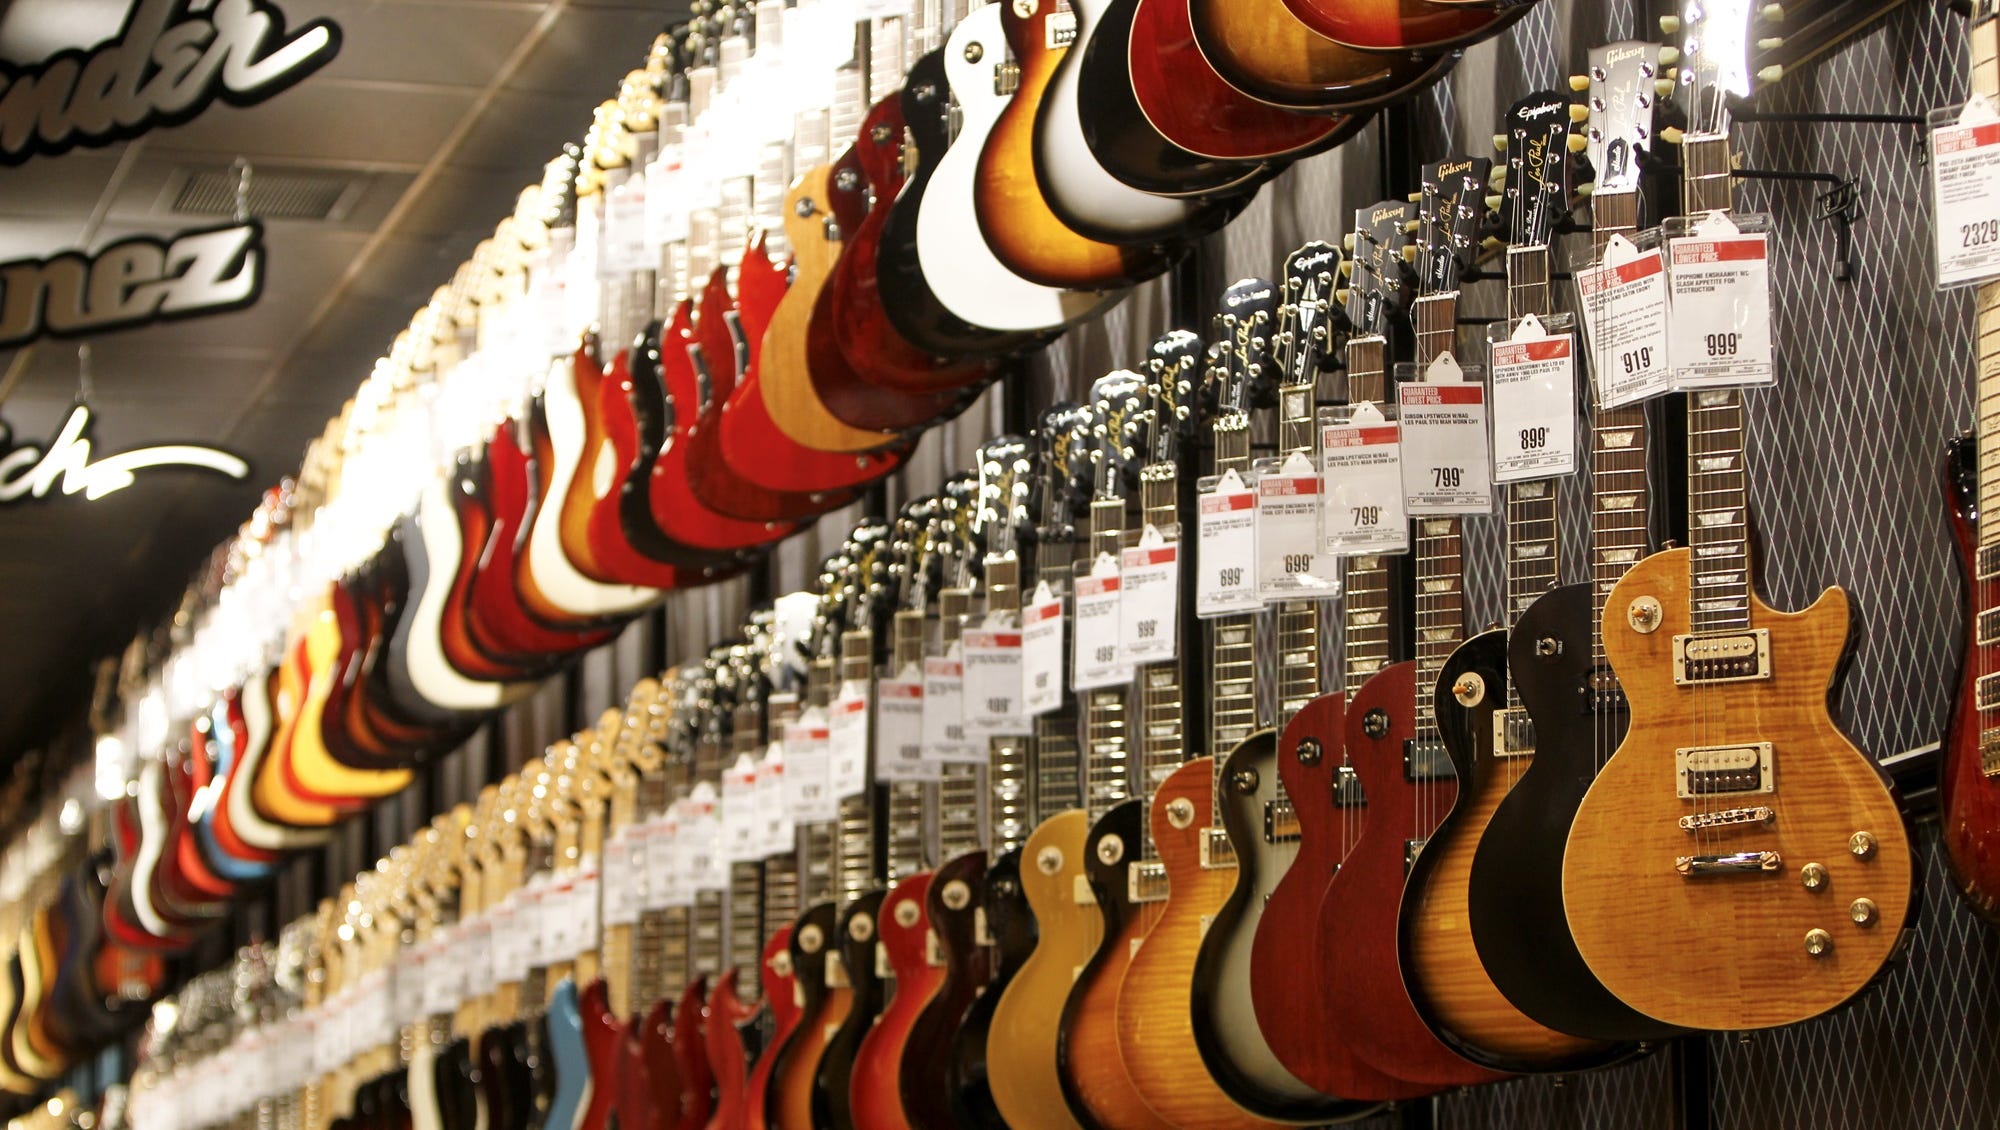 Guitar Center to open in RiverGate Mall guitar center commission